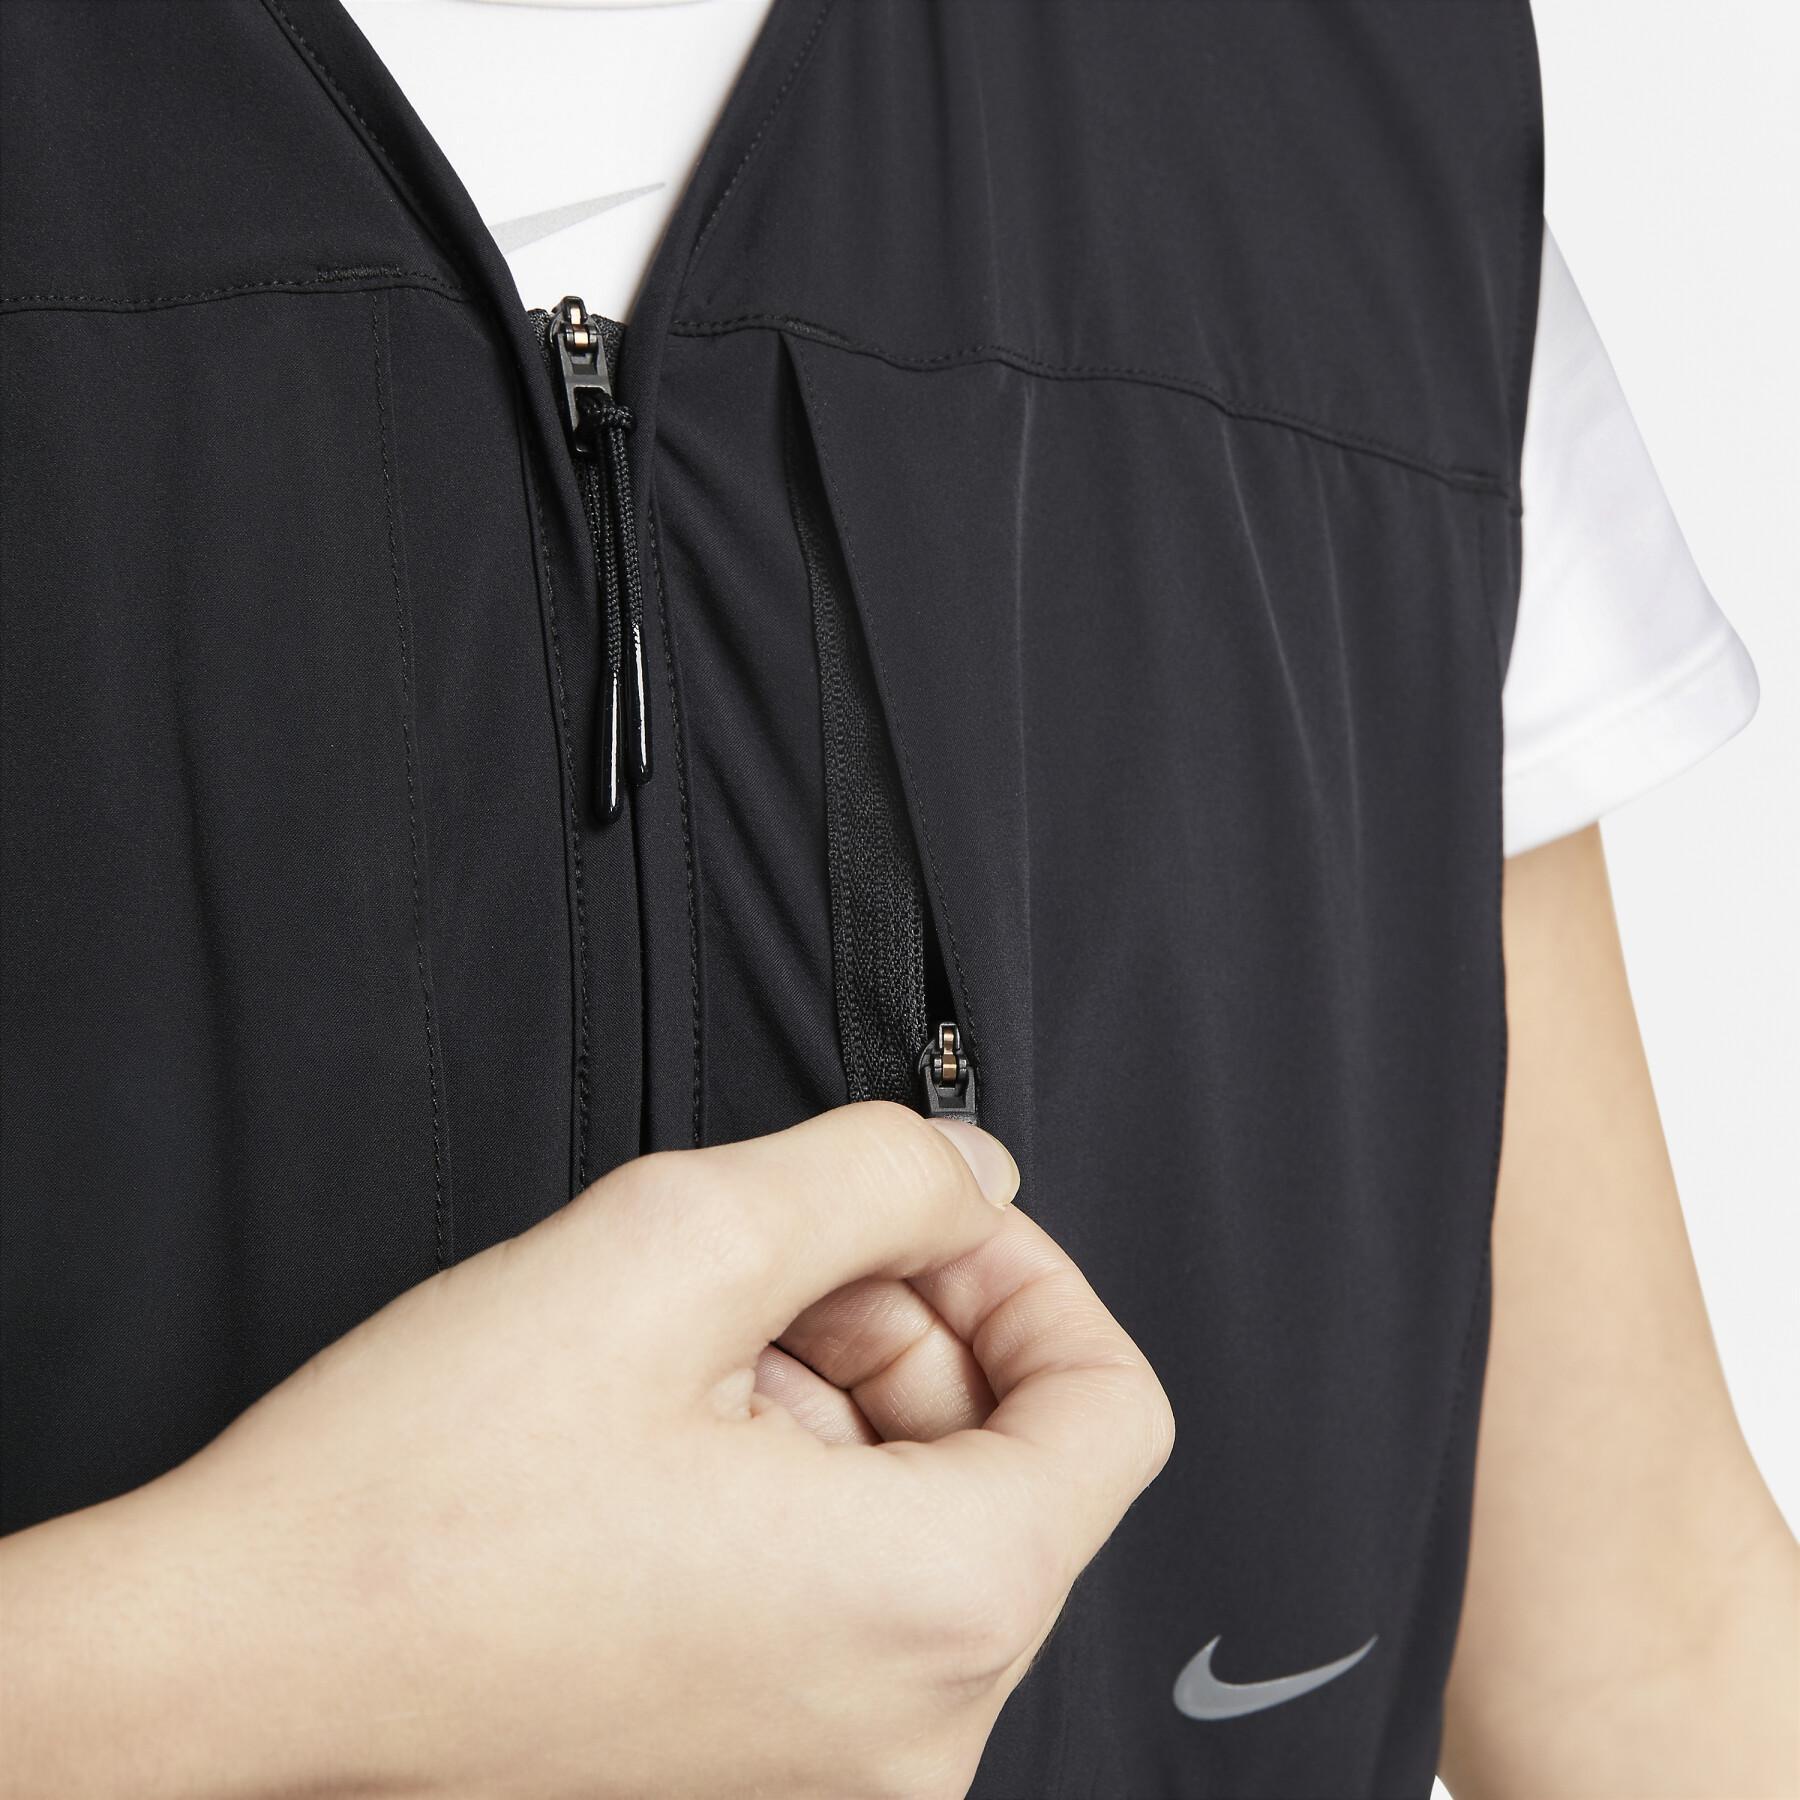 Sleeveless jacket for women Nike Dri-Fit CTY RDY Bliss